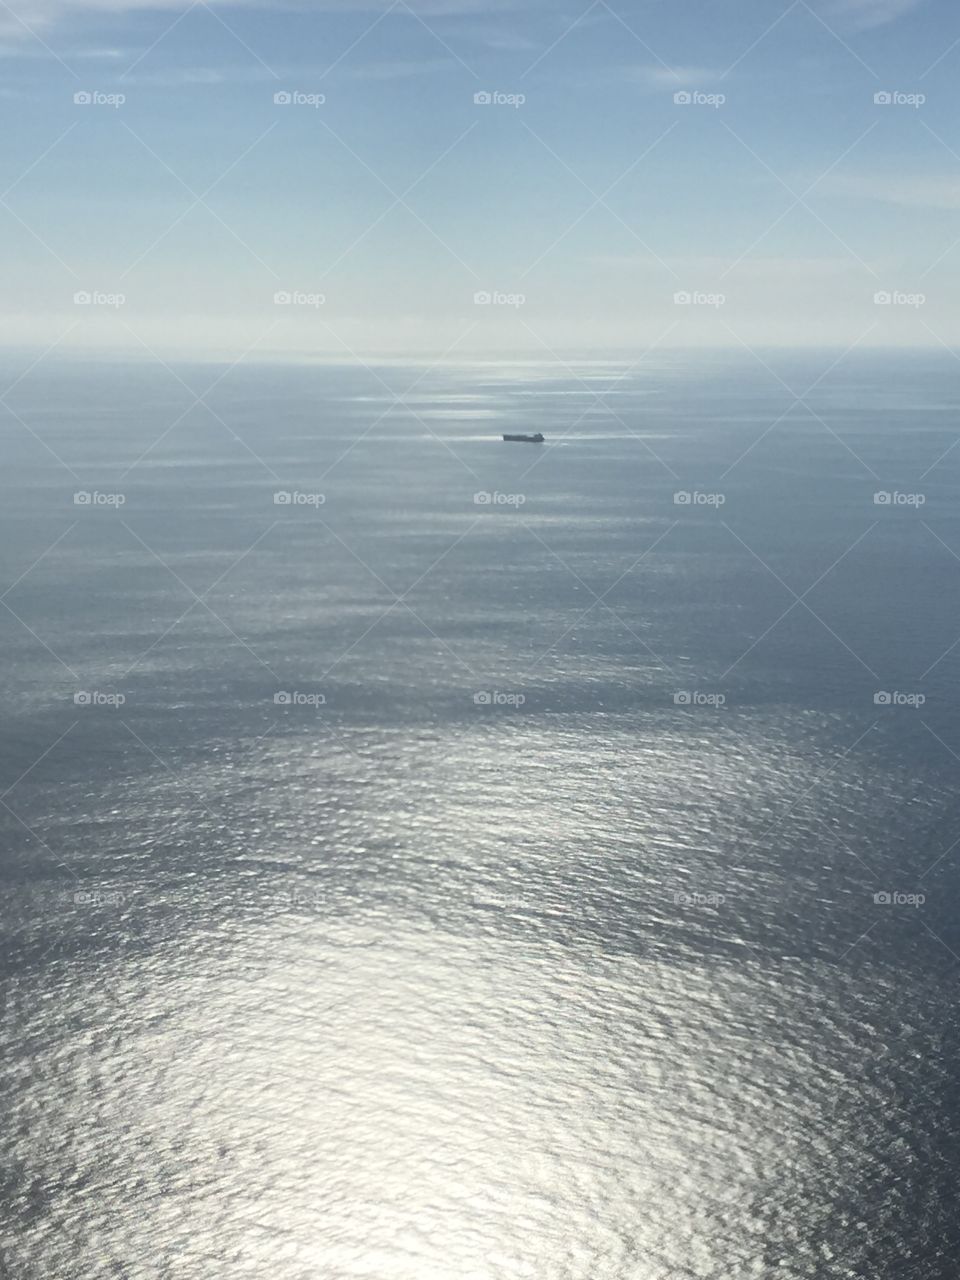 Gulf of Mexico from a helicopter 